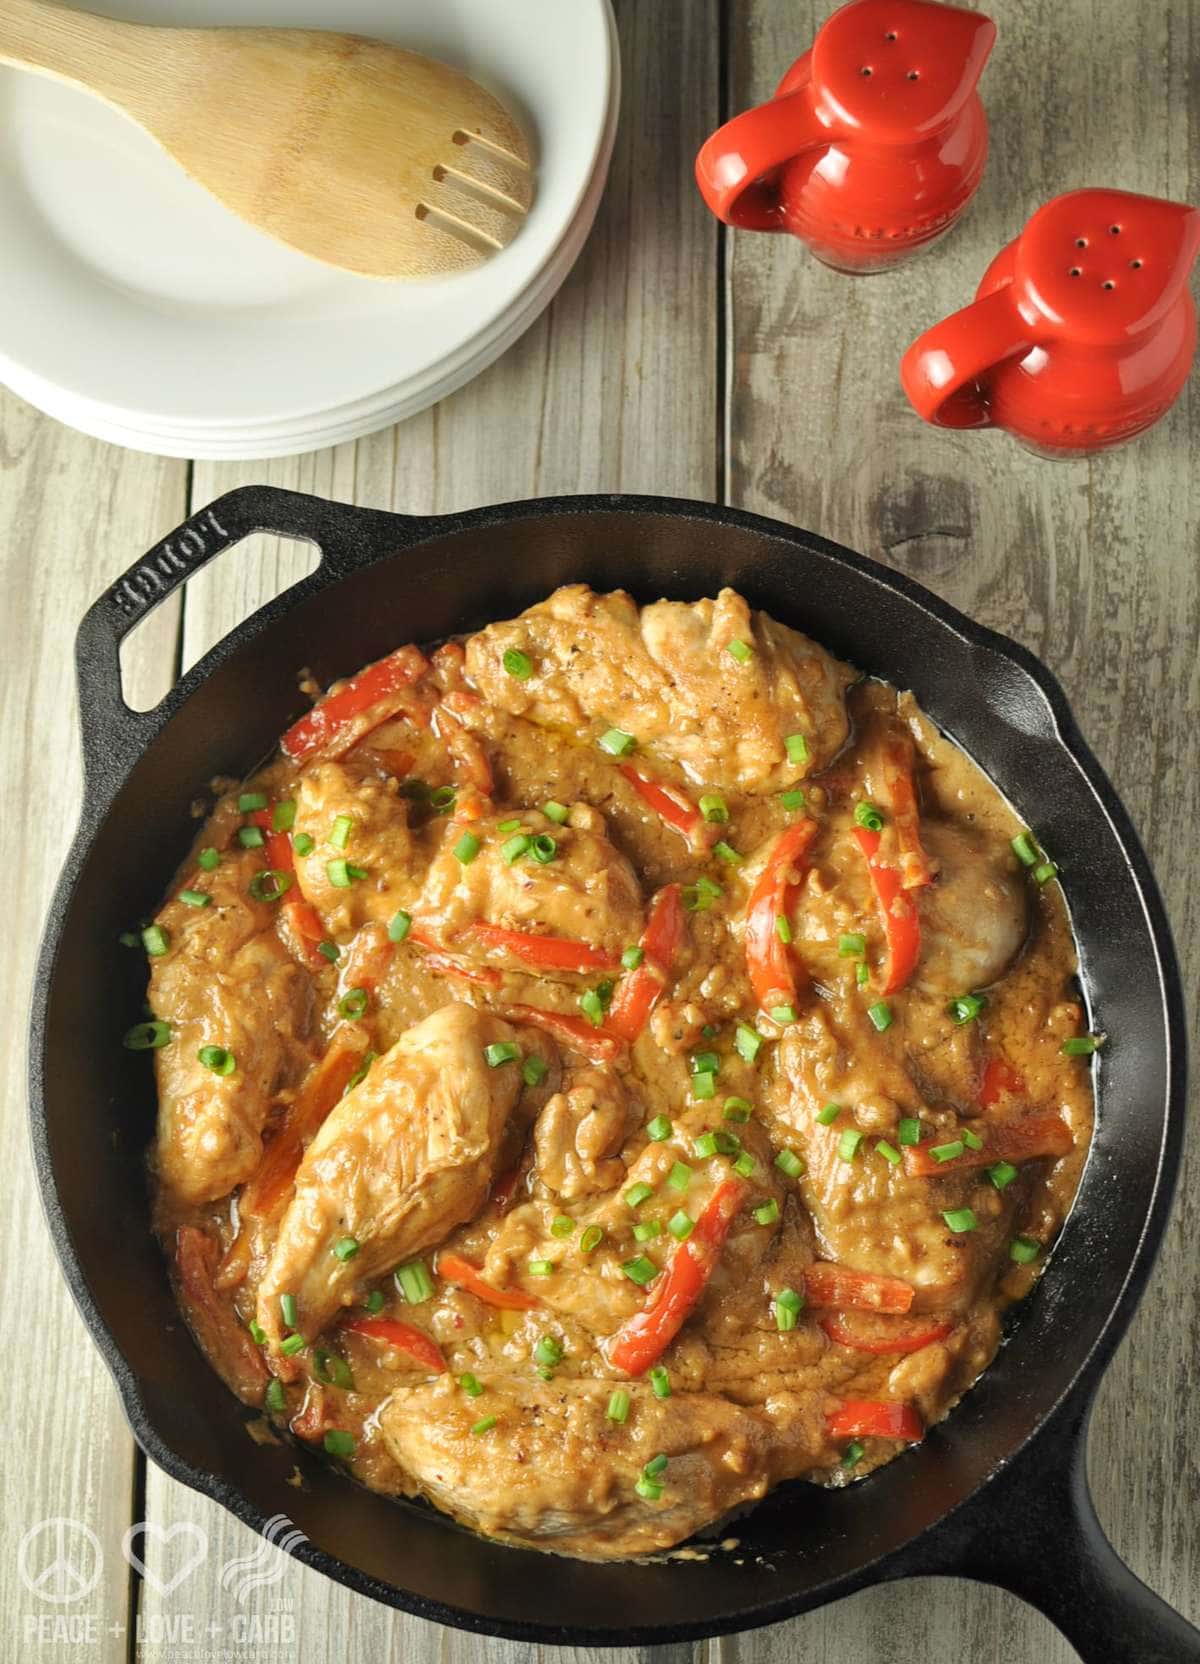 Low Carb Peanut Chicken Skillet | Peace Love and Low Carb